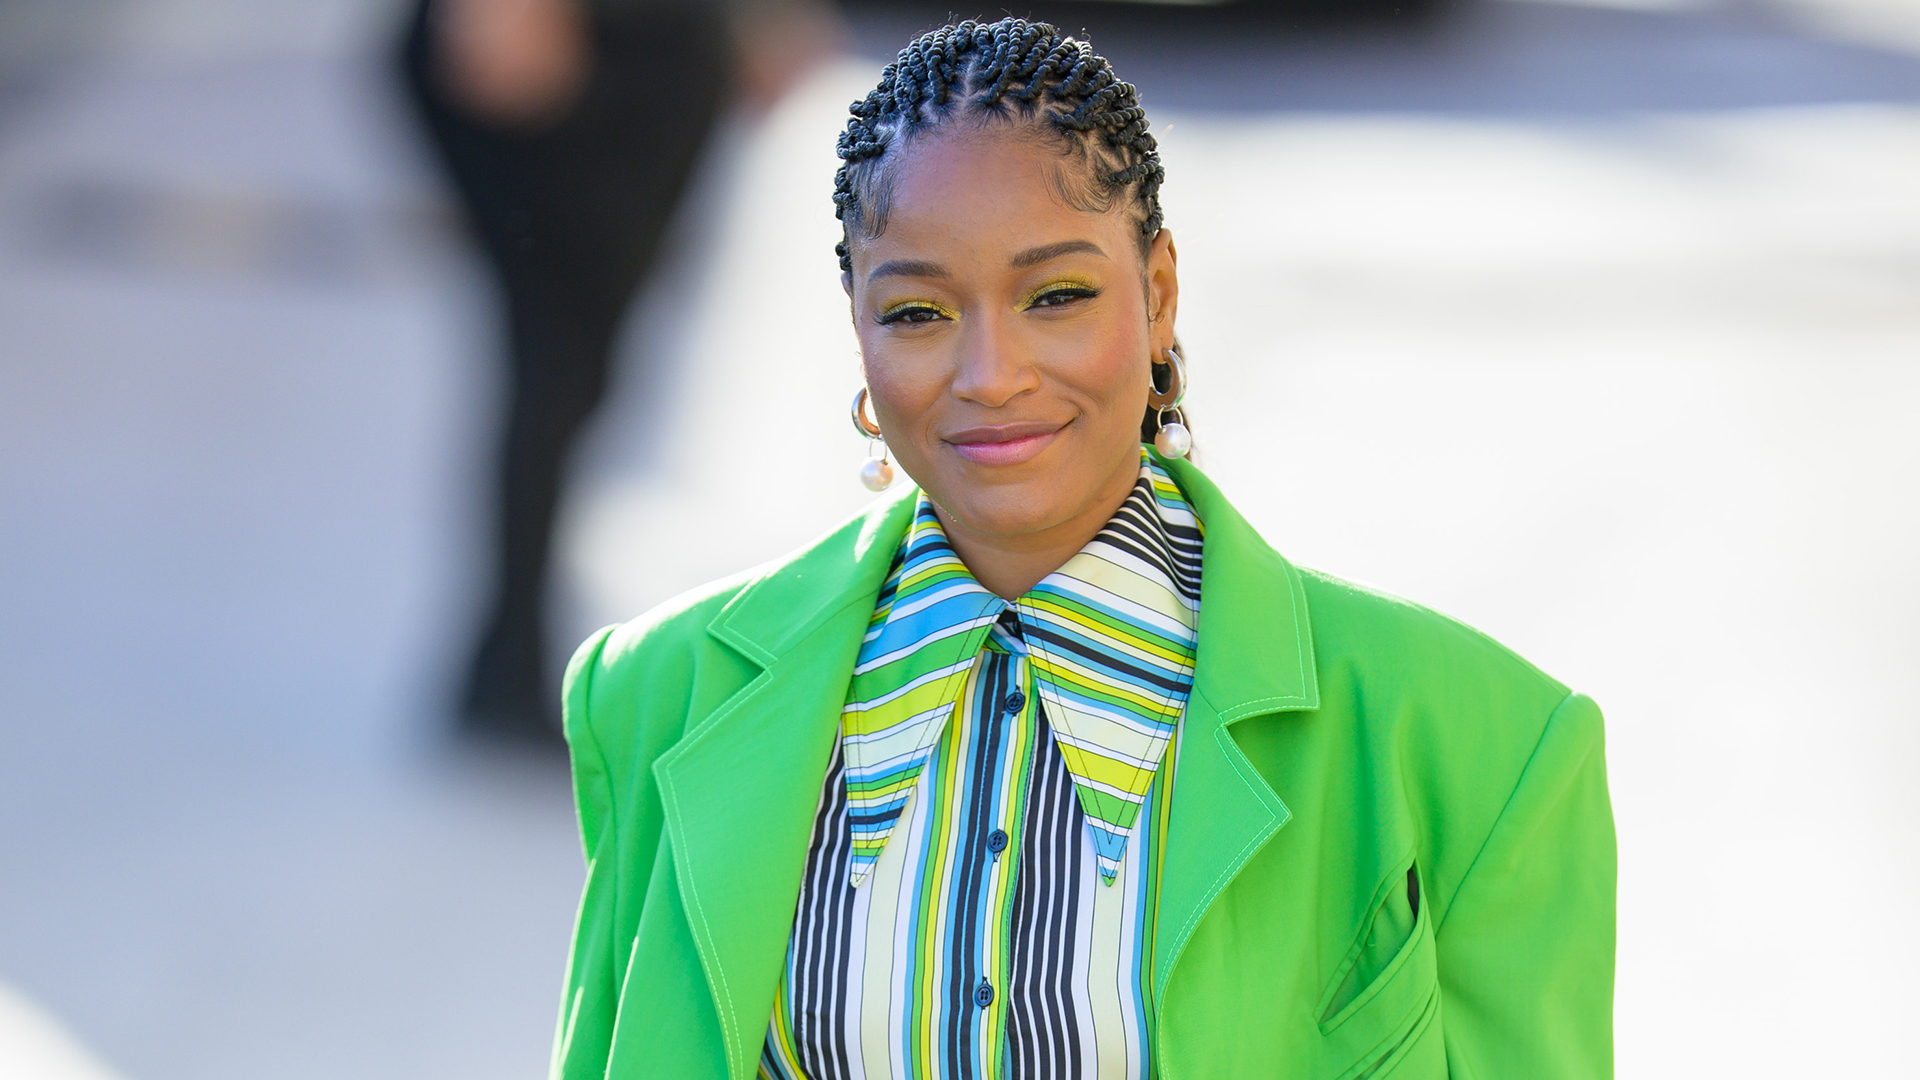 Keke Palmer Says She Took 'A Real Bet' By Investing Her Own Dollars To Launch A Digital Network